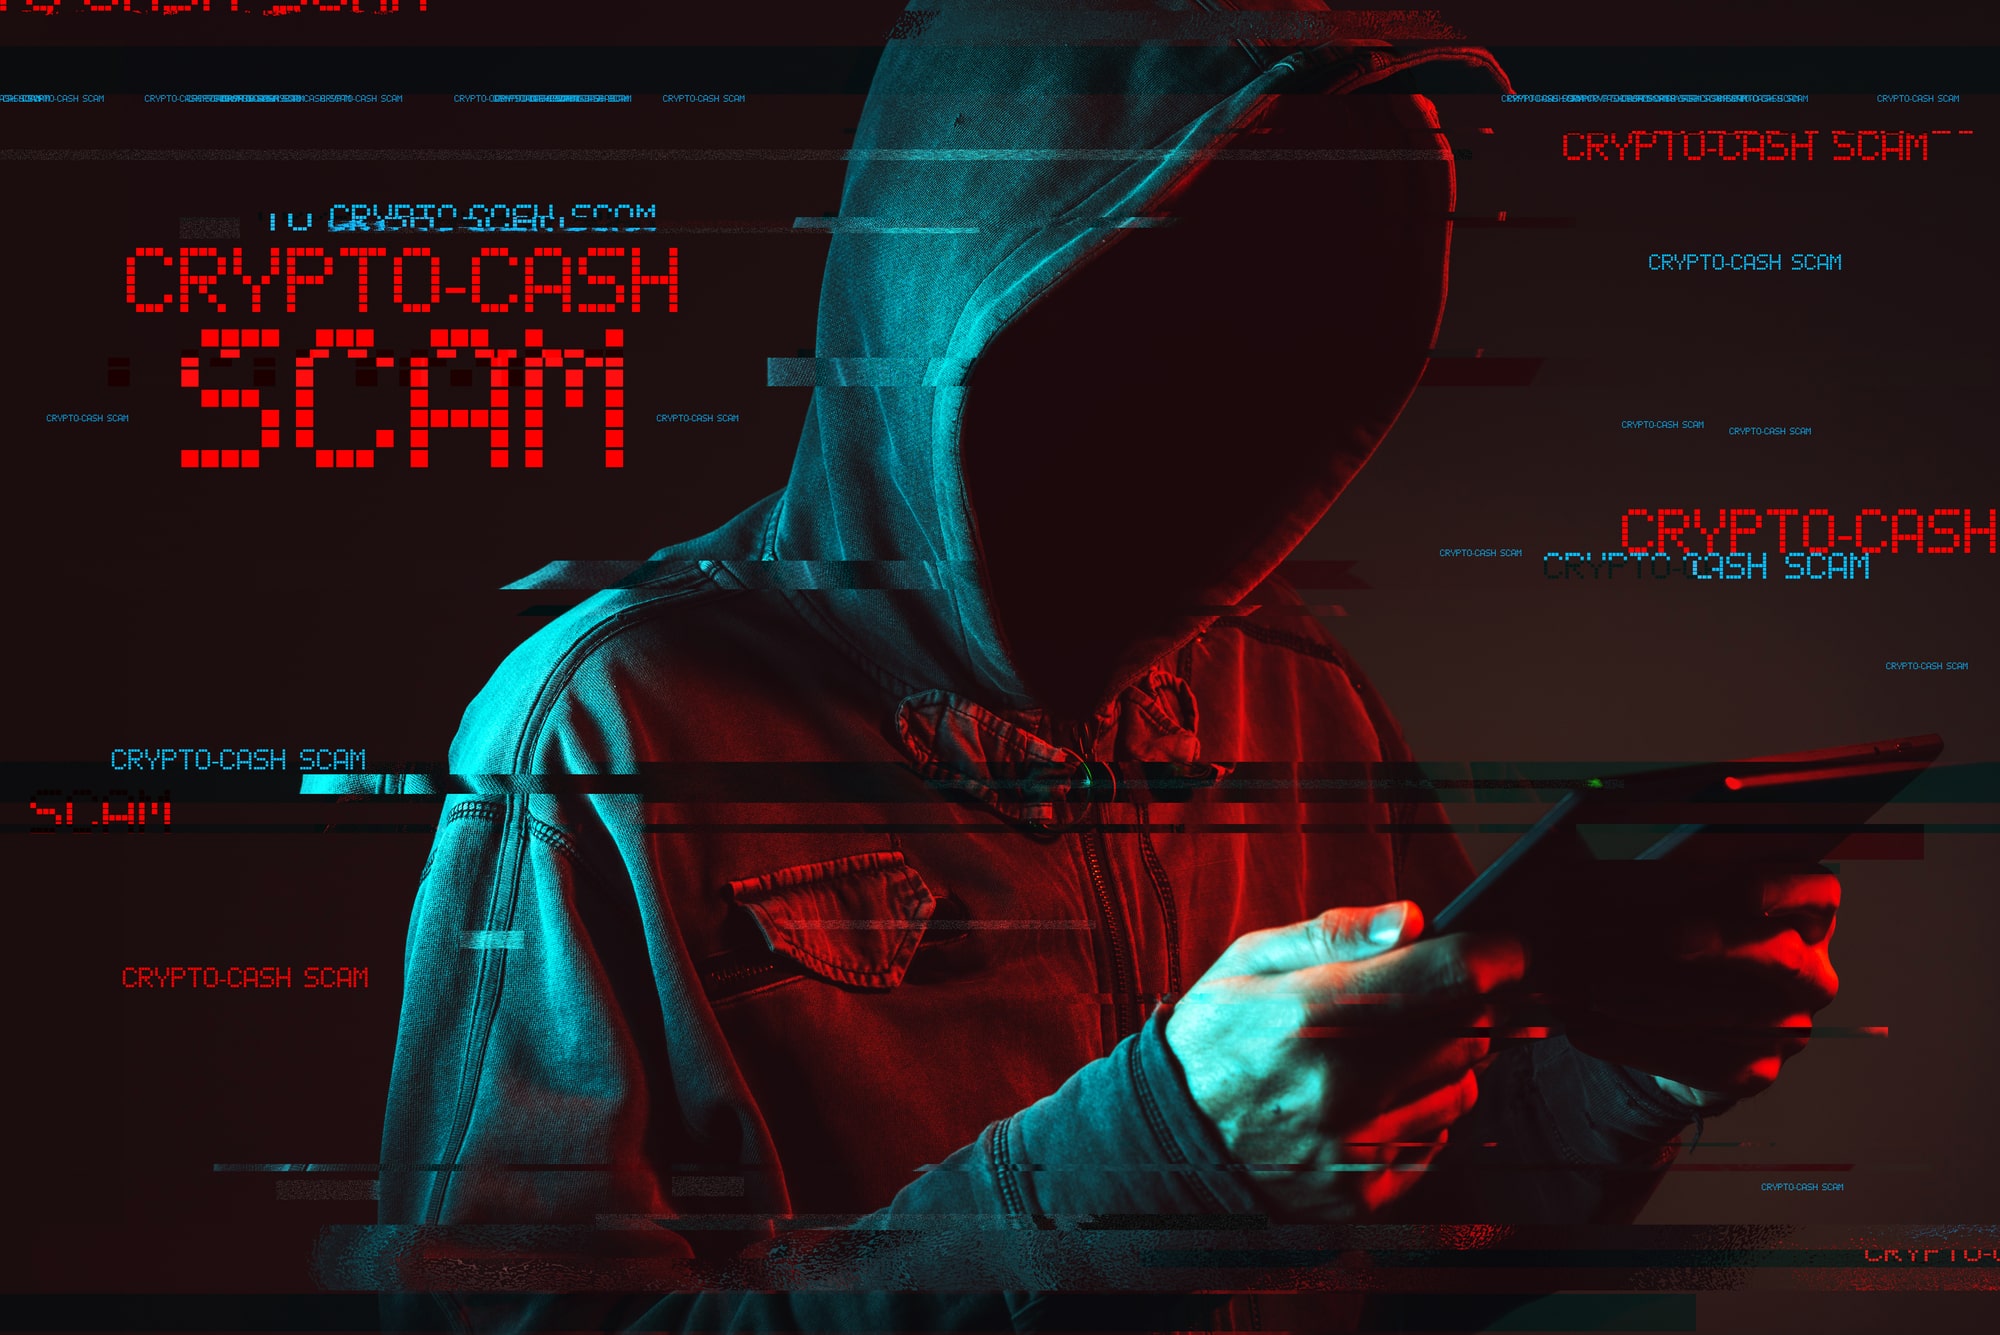 Experts explain: How to avoid crypto scams